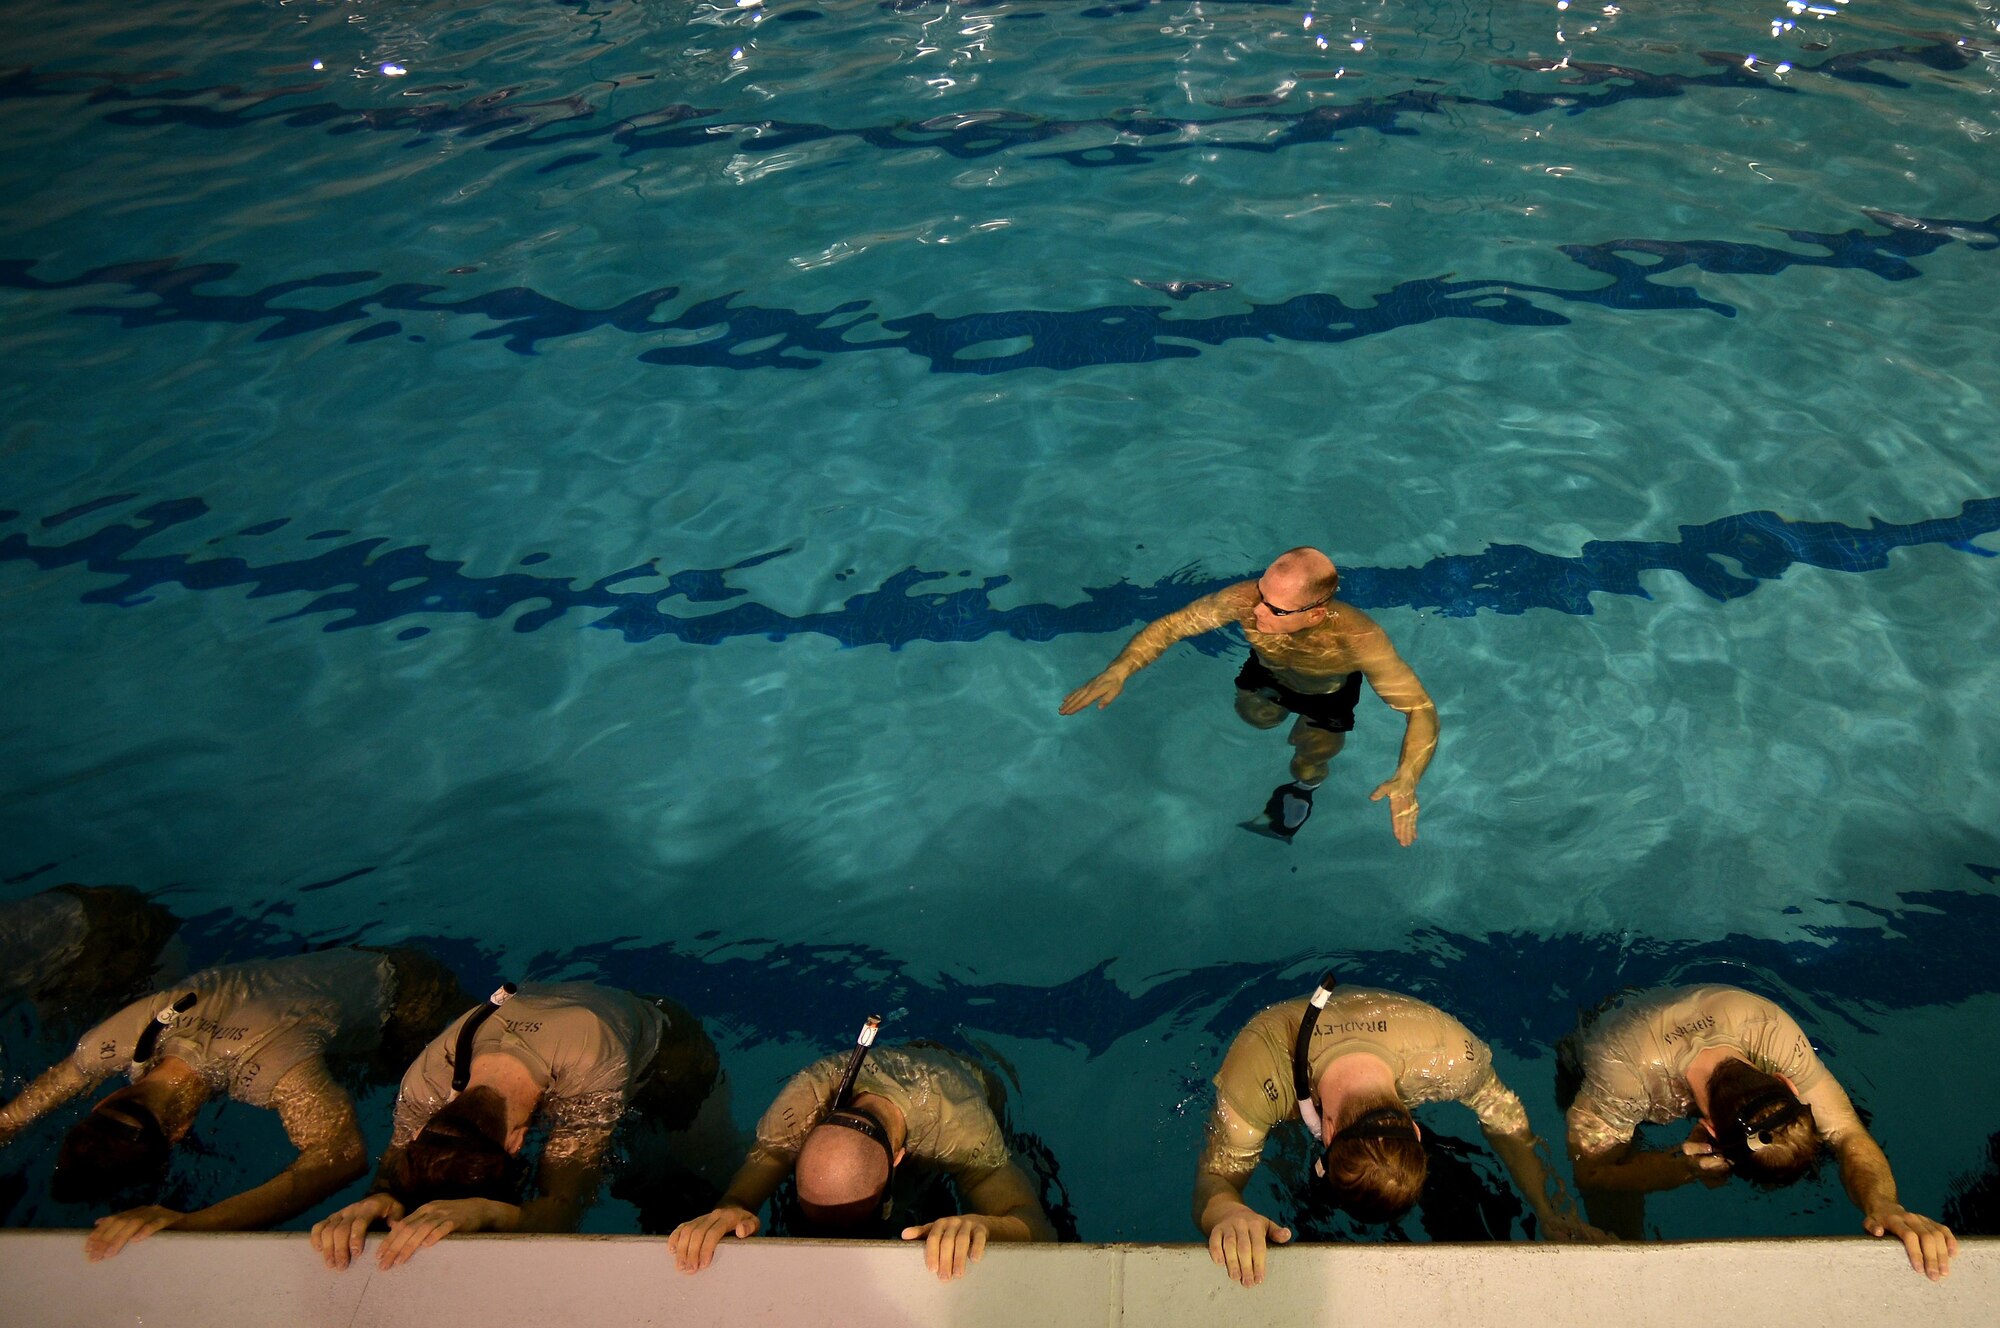 A U.S. Air Force Combat Control instructor assigned to Operating Location C, 342nd Training Squadron, (back) gives commands to CCT trainees during an early morning water circuit training session at Pope Army Airfield, North Carolina, Feb 12, 2015. CCTs among the most highly trained personnel in the U.S. military. (U.S. Air Force photo by Staff Sgt. Kenny Holston)  